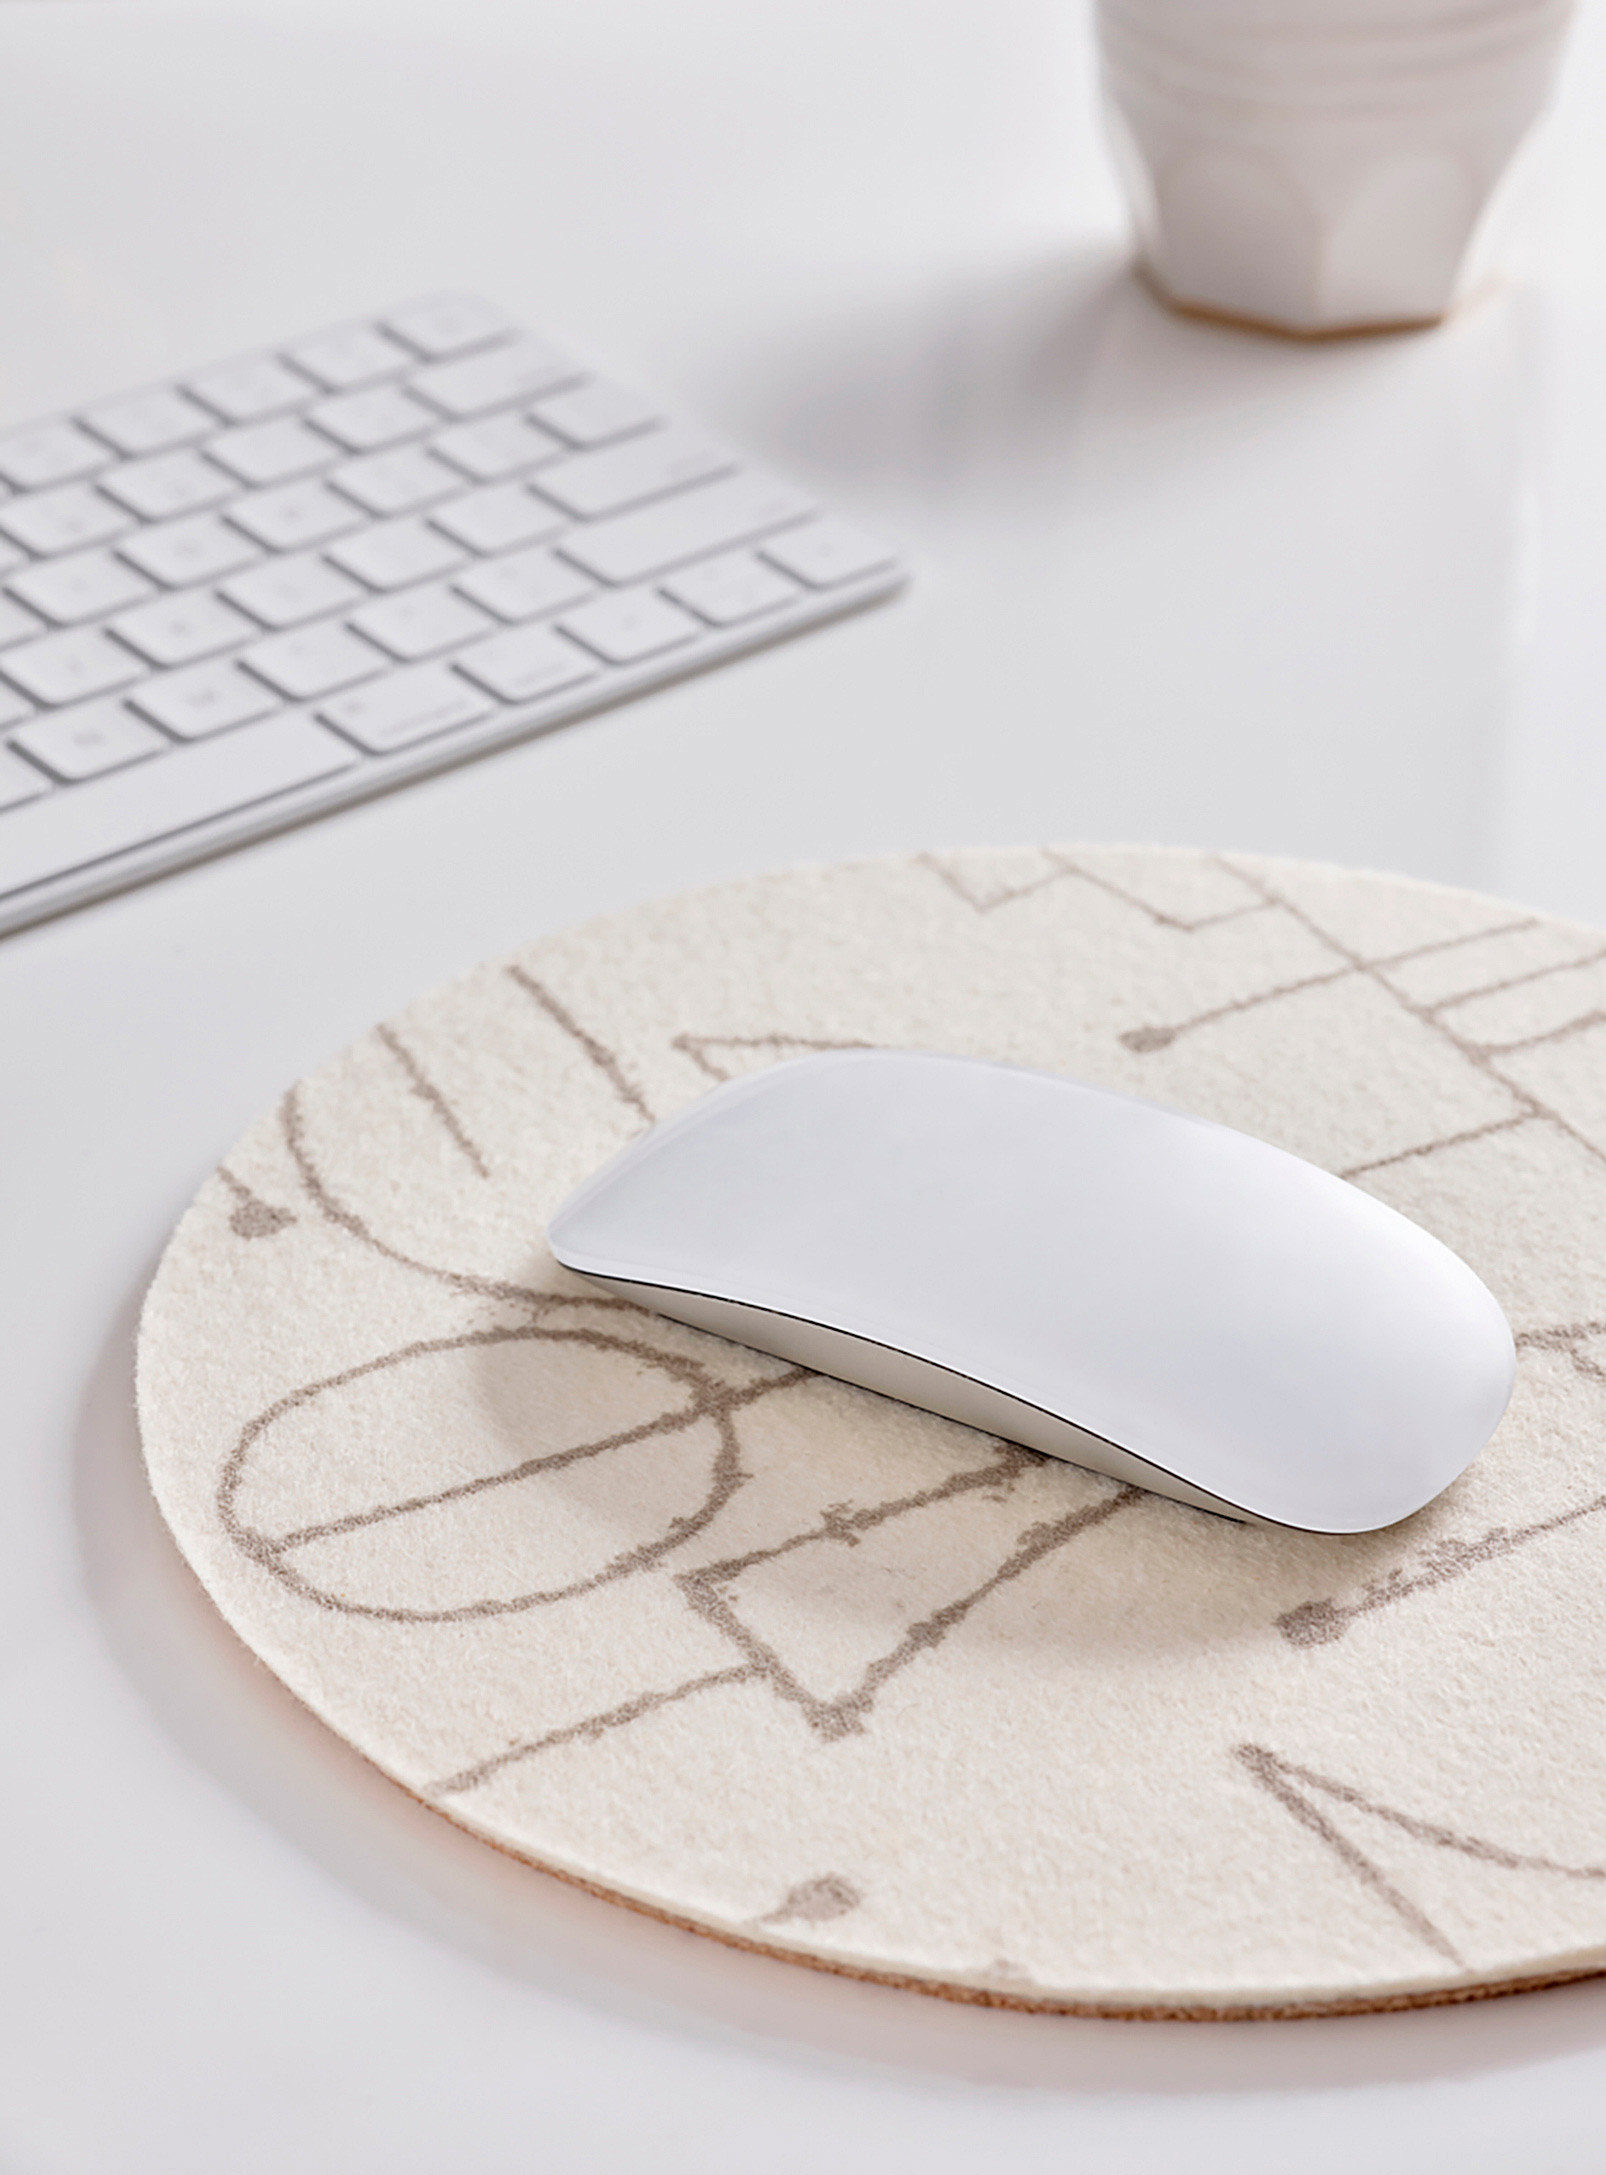 mouse on mouse pad